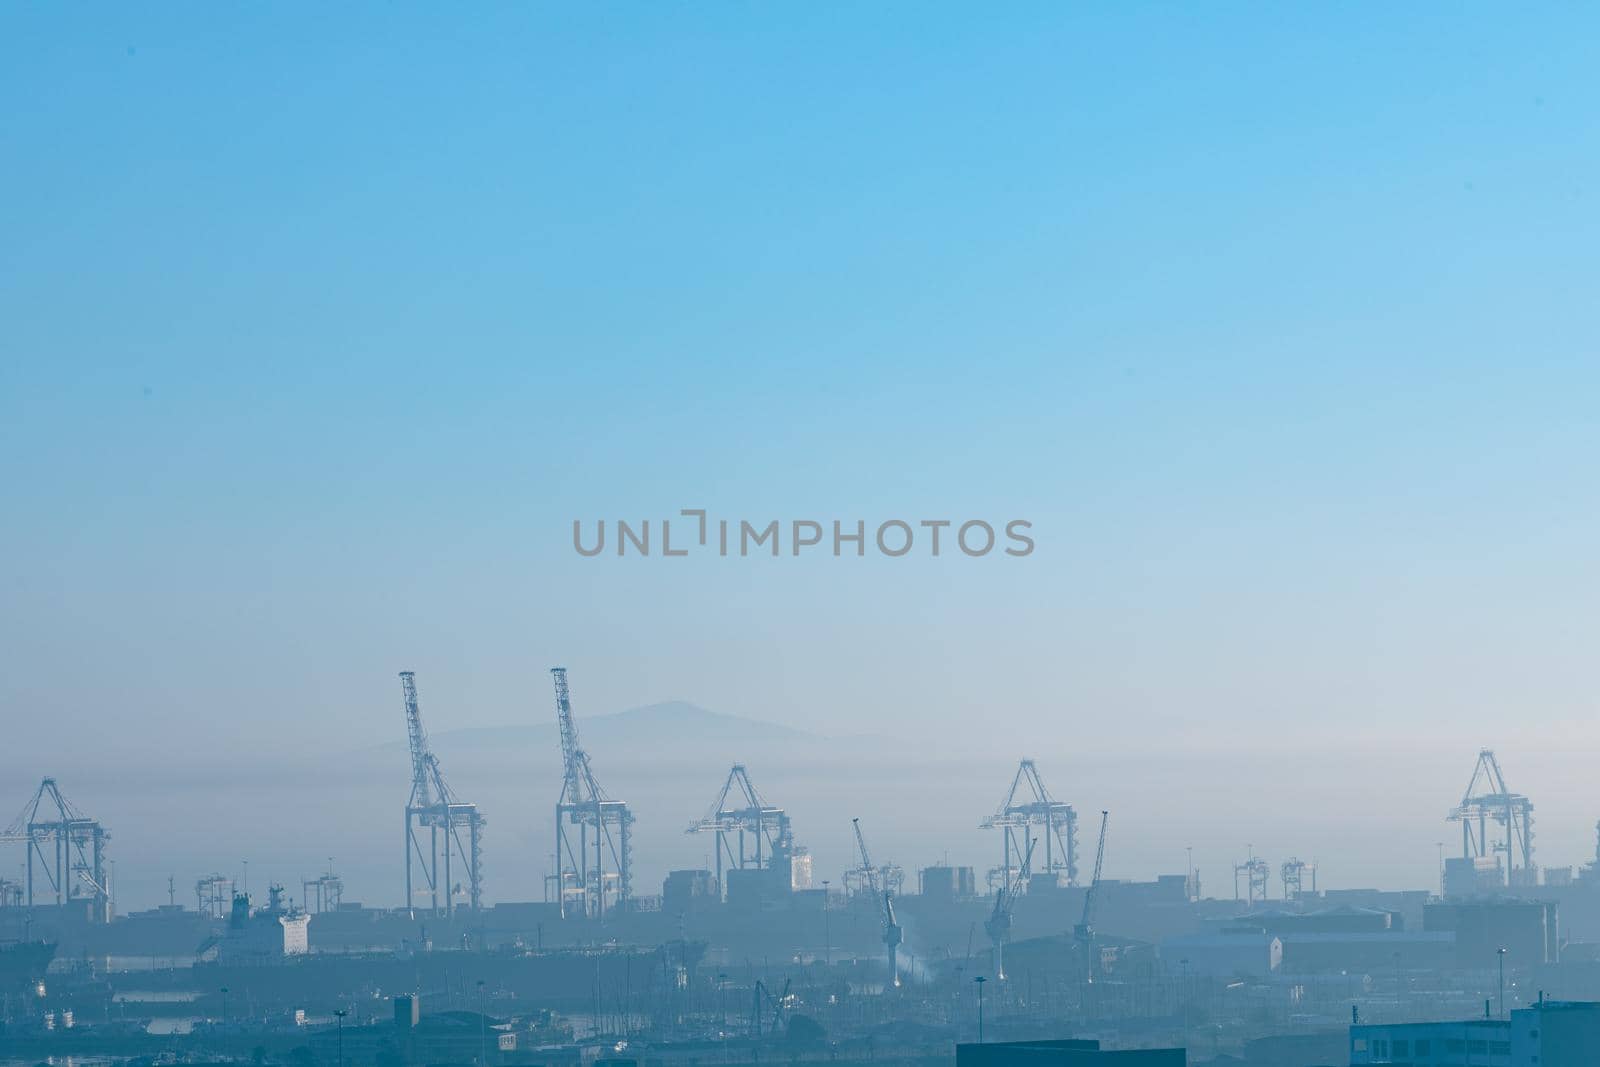 General view of cityscape with multiple modern buildings and cranes in the morning. skyline and urban architecture.